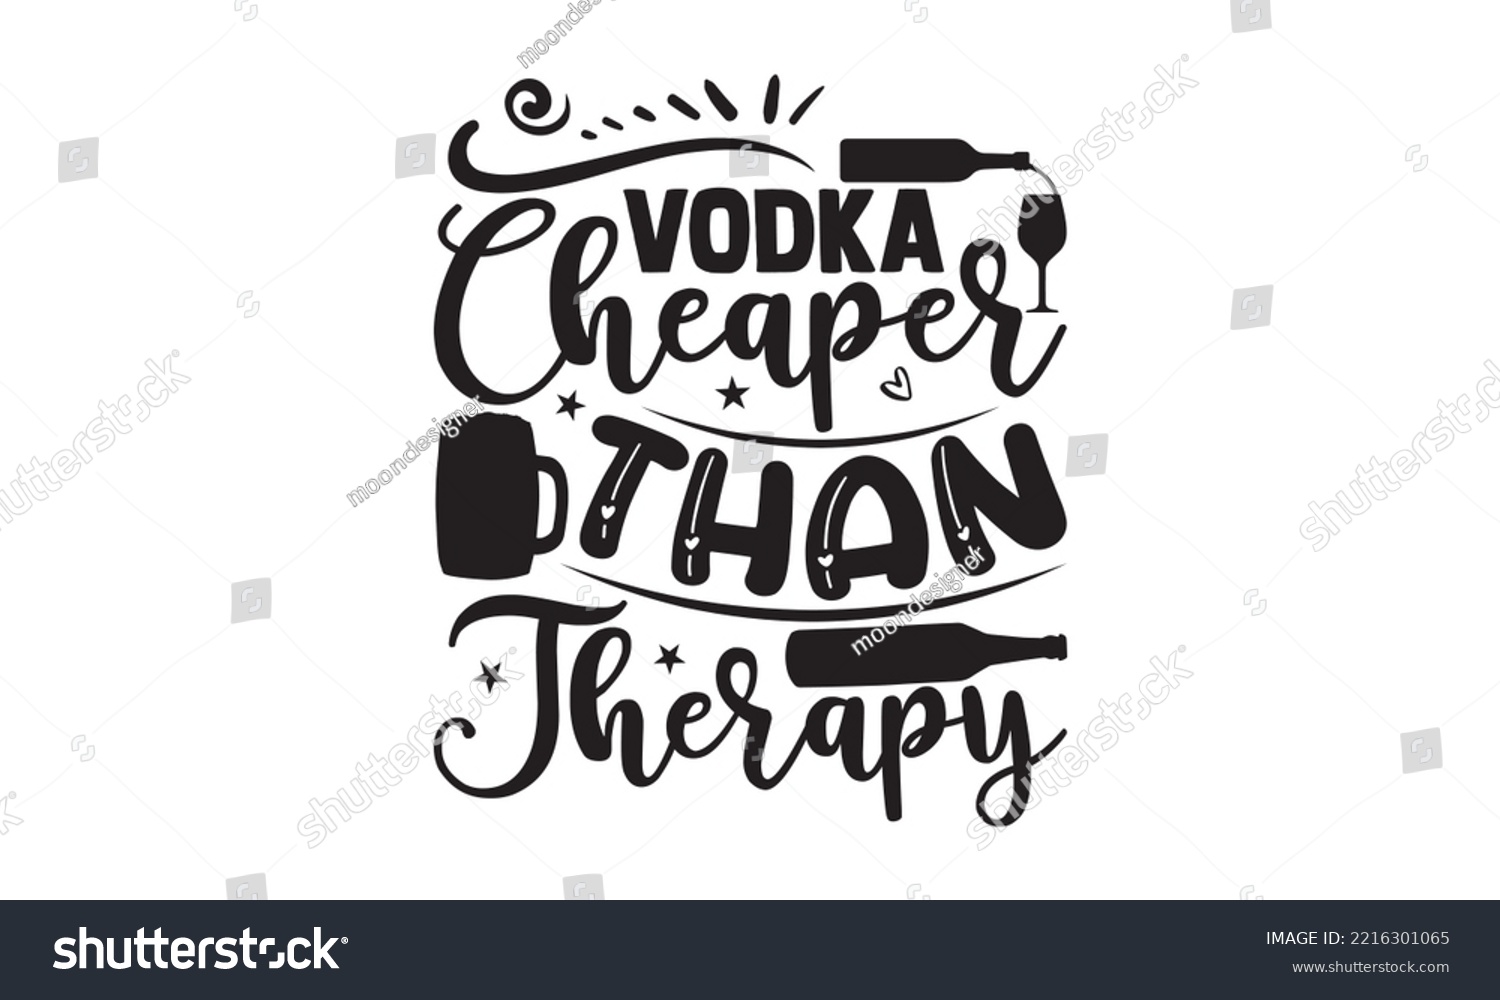 SVG of Vodka cheaper than therapy - Alcohol SVG T Shirt design, Girl Beer Design, Prost, Pretzels and Beer, Vector EPS Editable Files, Alcohol funny quotes, Oktoberfest Alcohol SVG design,  EPS 10 svg